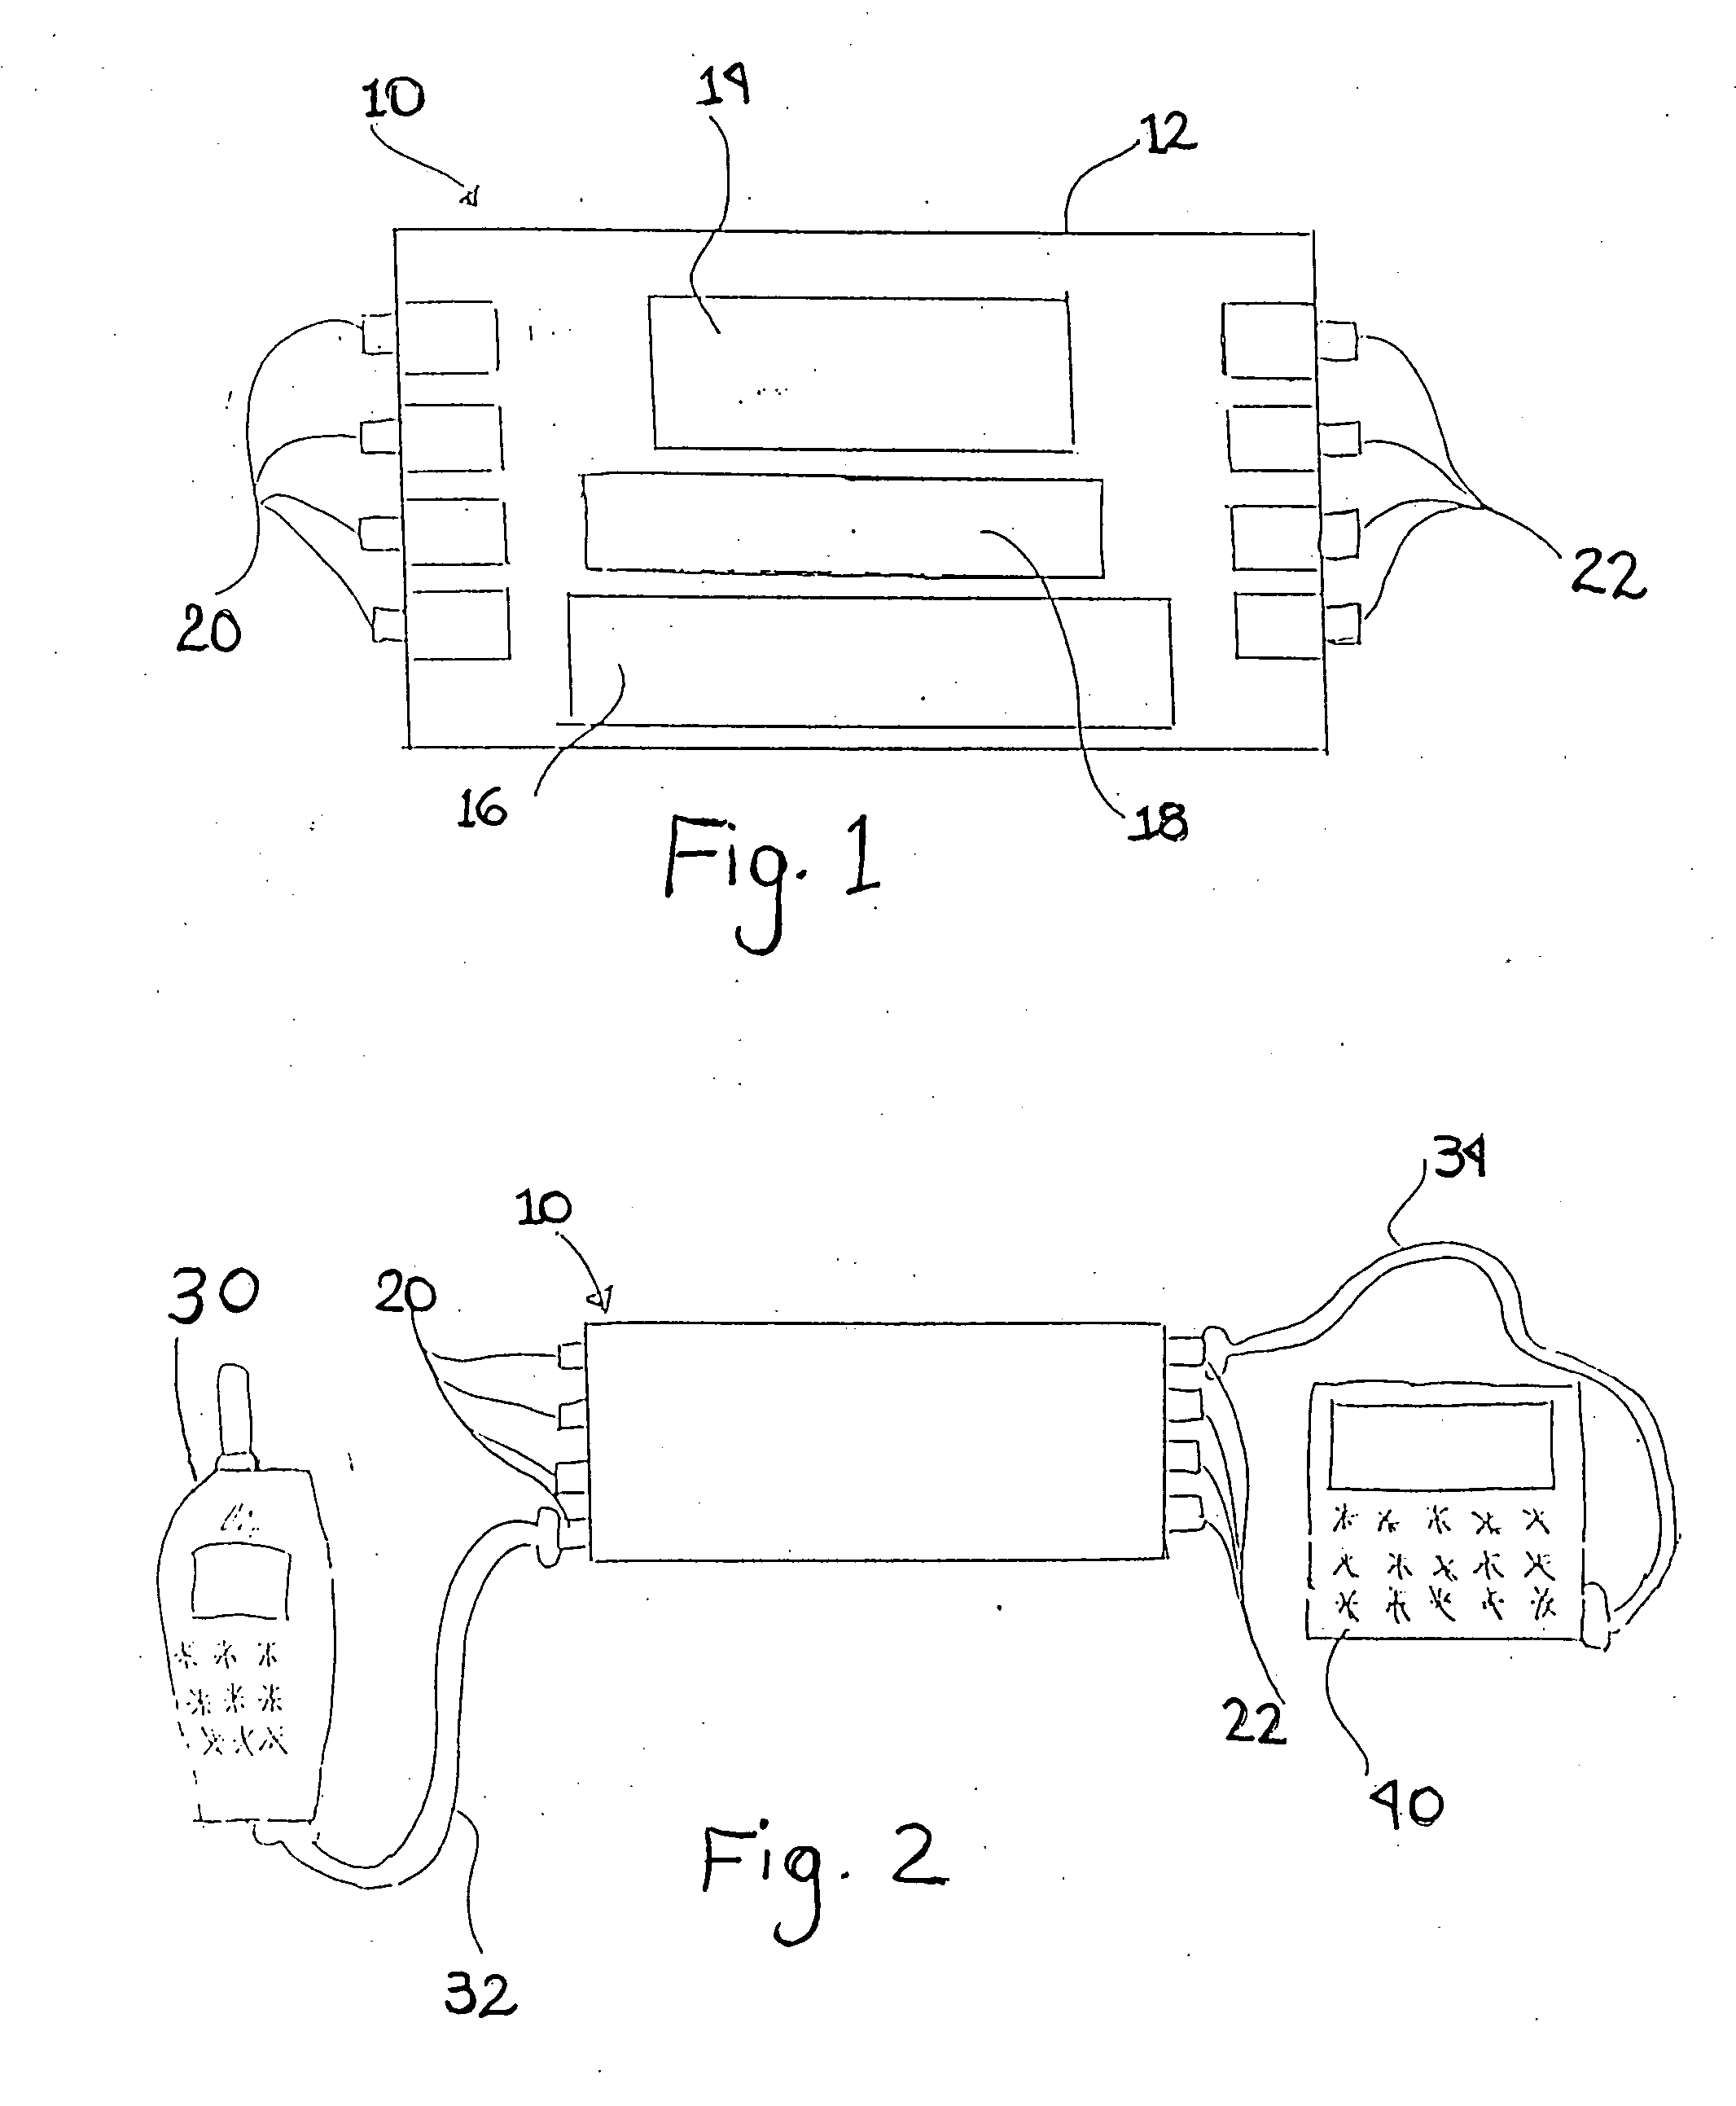 Data transfer device and system